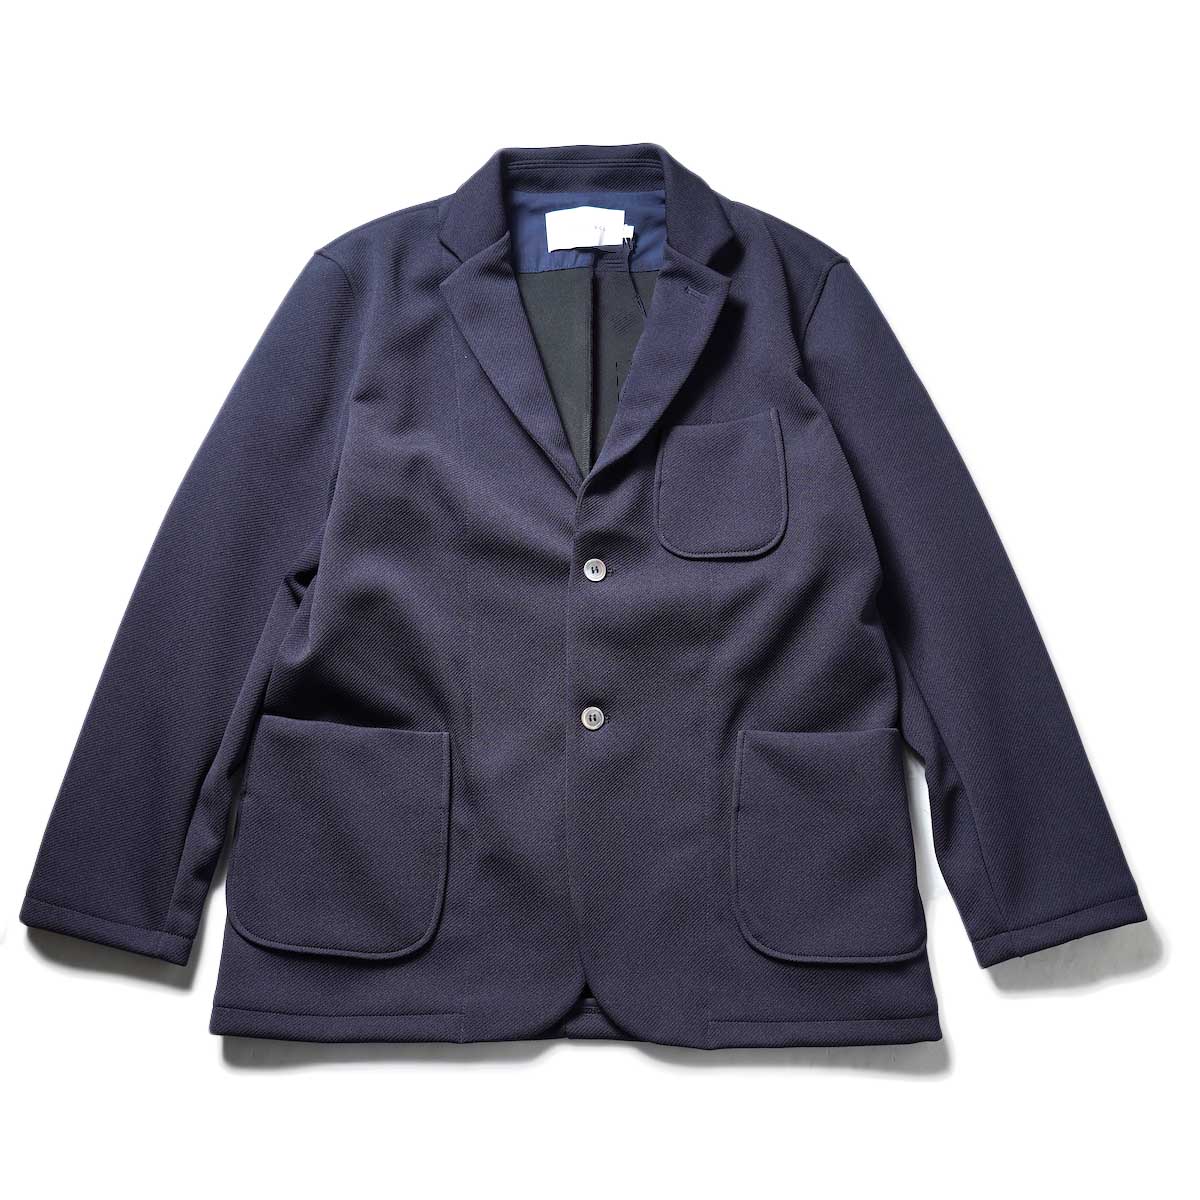 CURLY / TRACK JACKET “Kersey” (Navy)